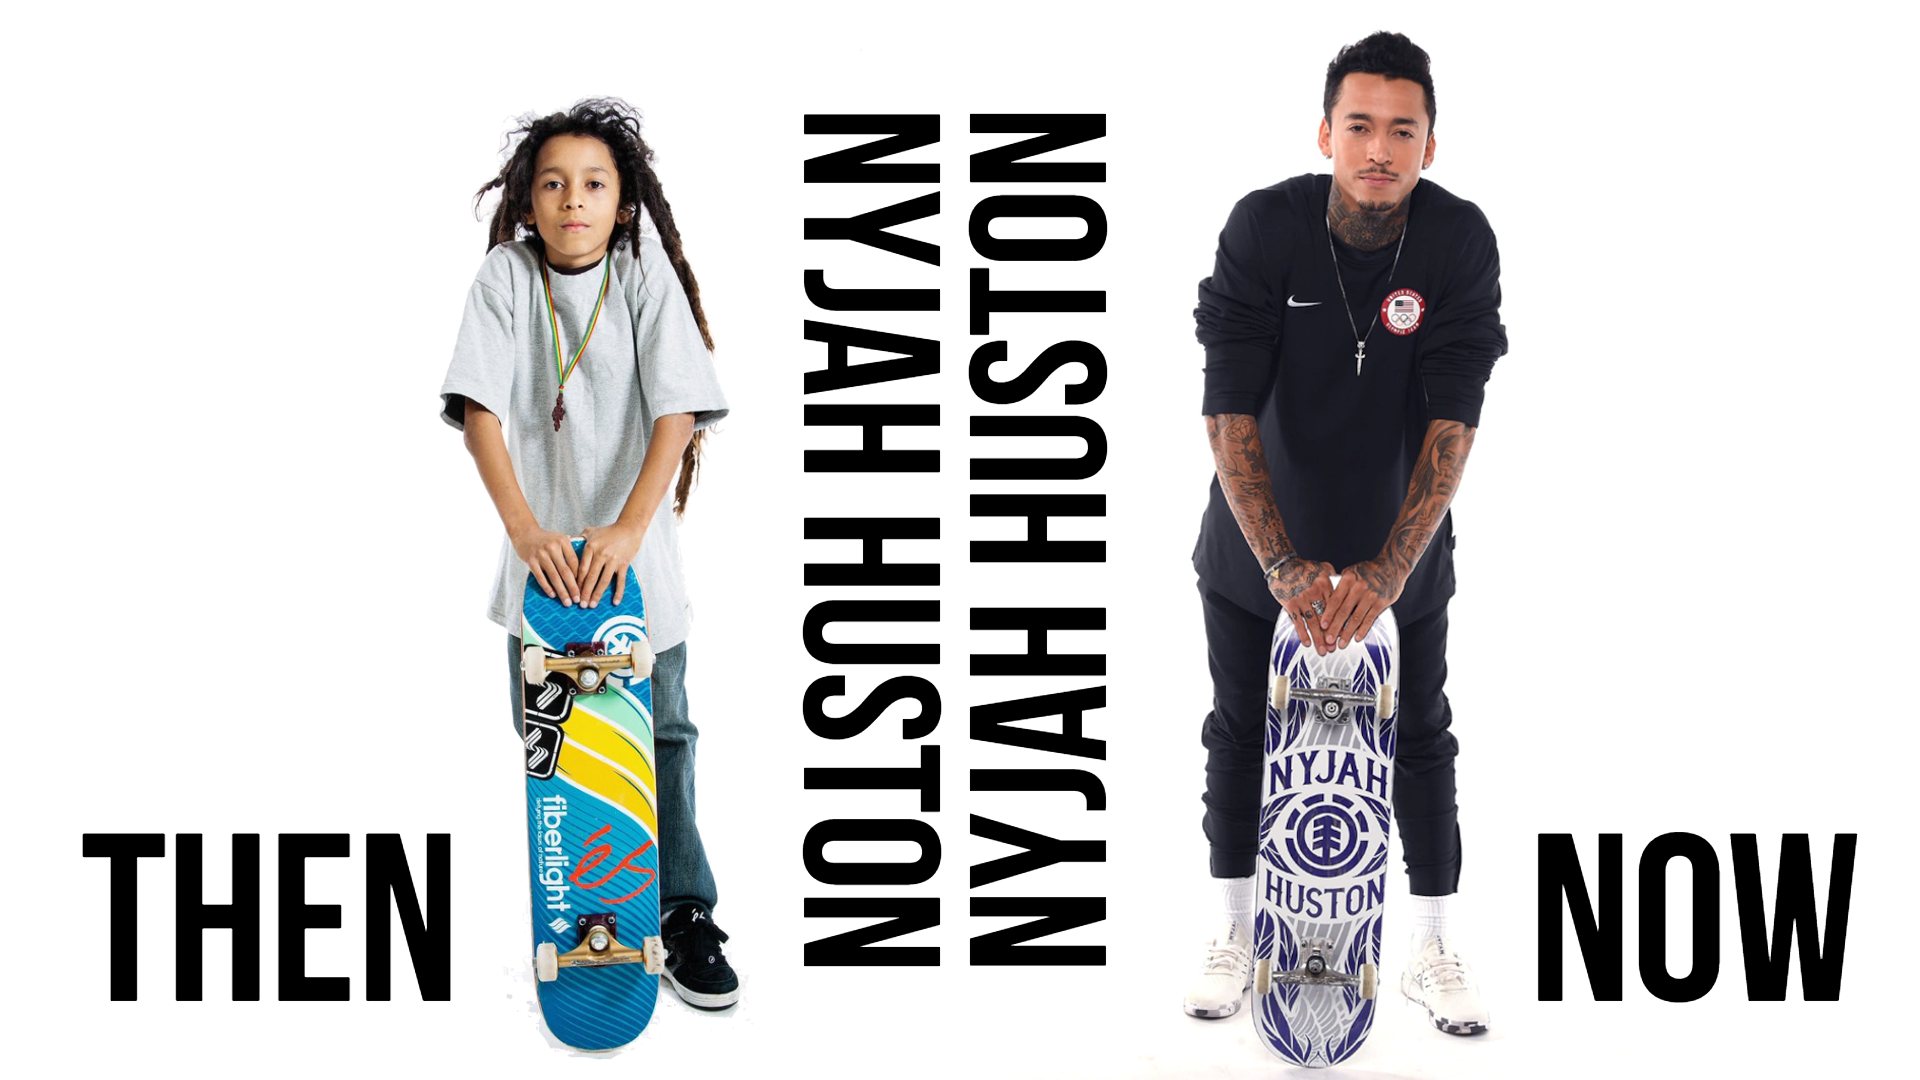 nyjah huston then and now